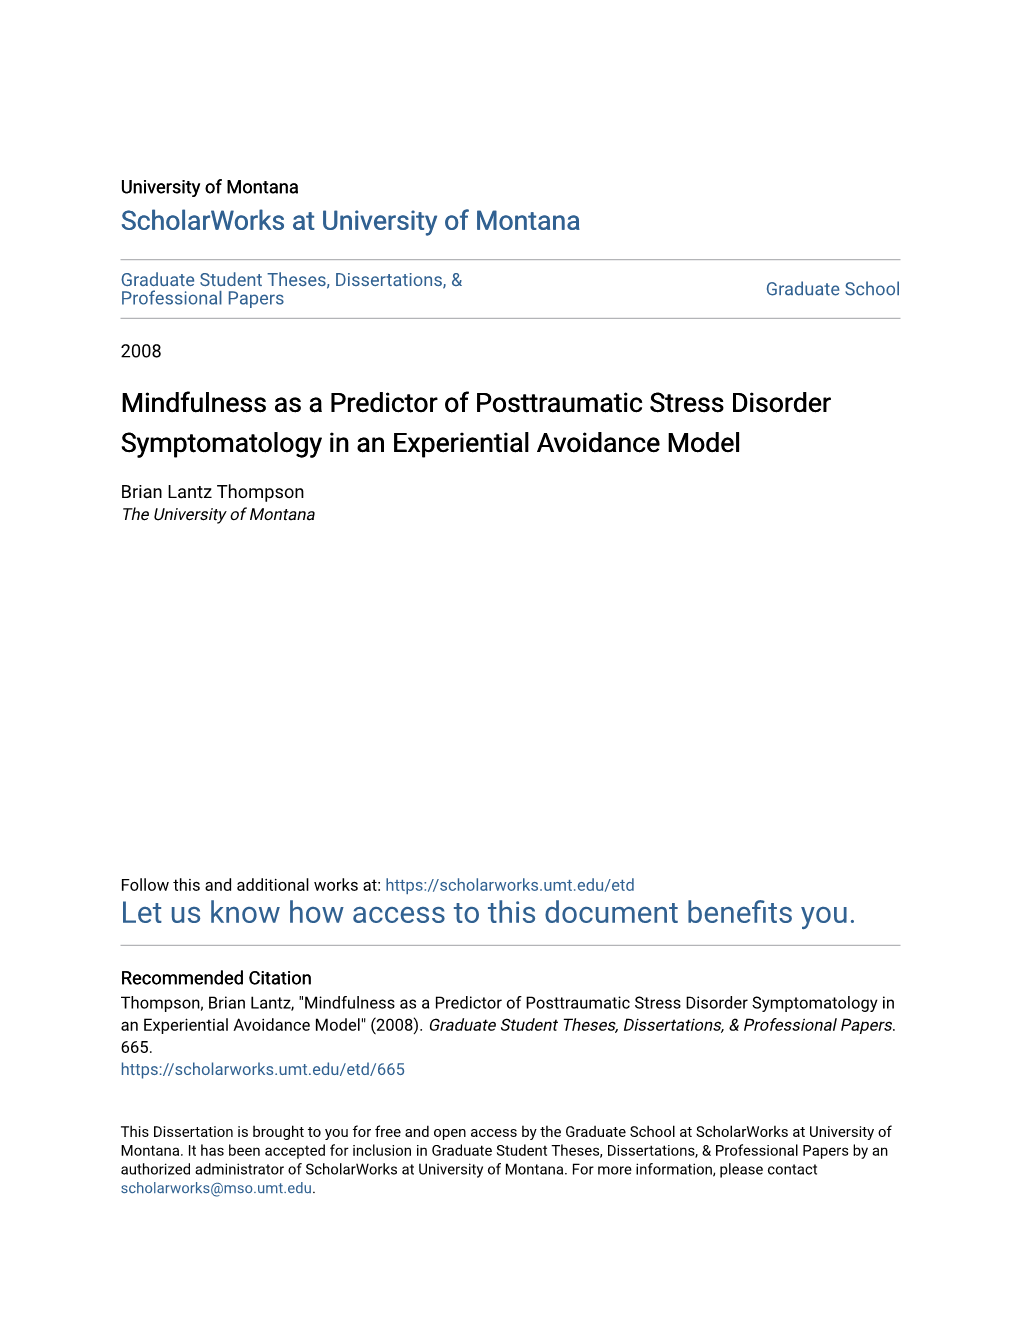 Mindfulness As a Predictor of Posttraumatic Stress Disorder Symptomatology in an Experiential Avoidance Model